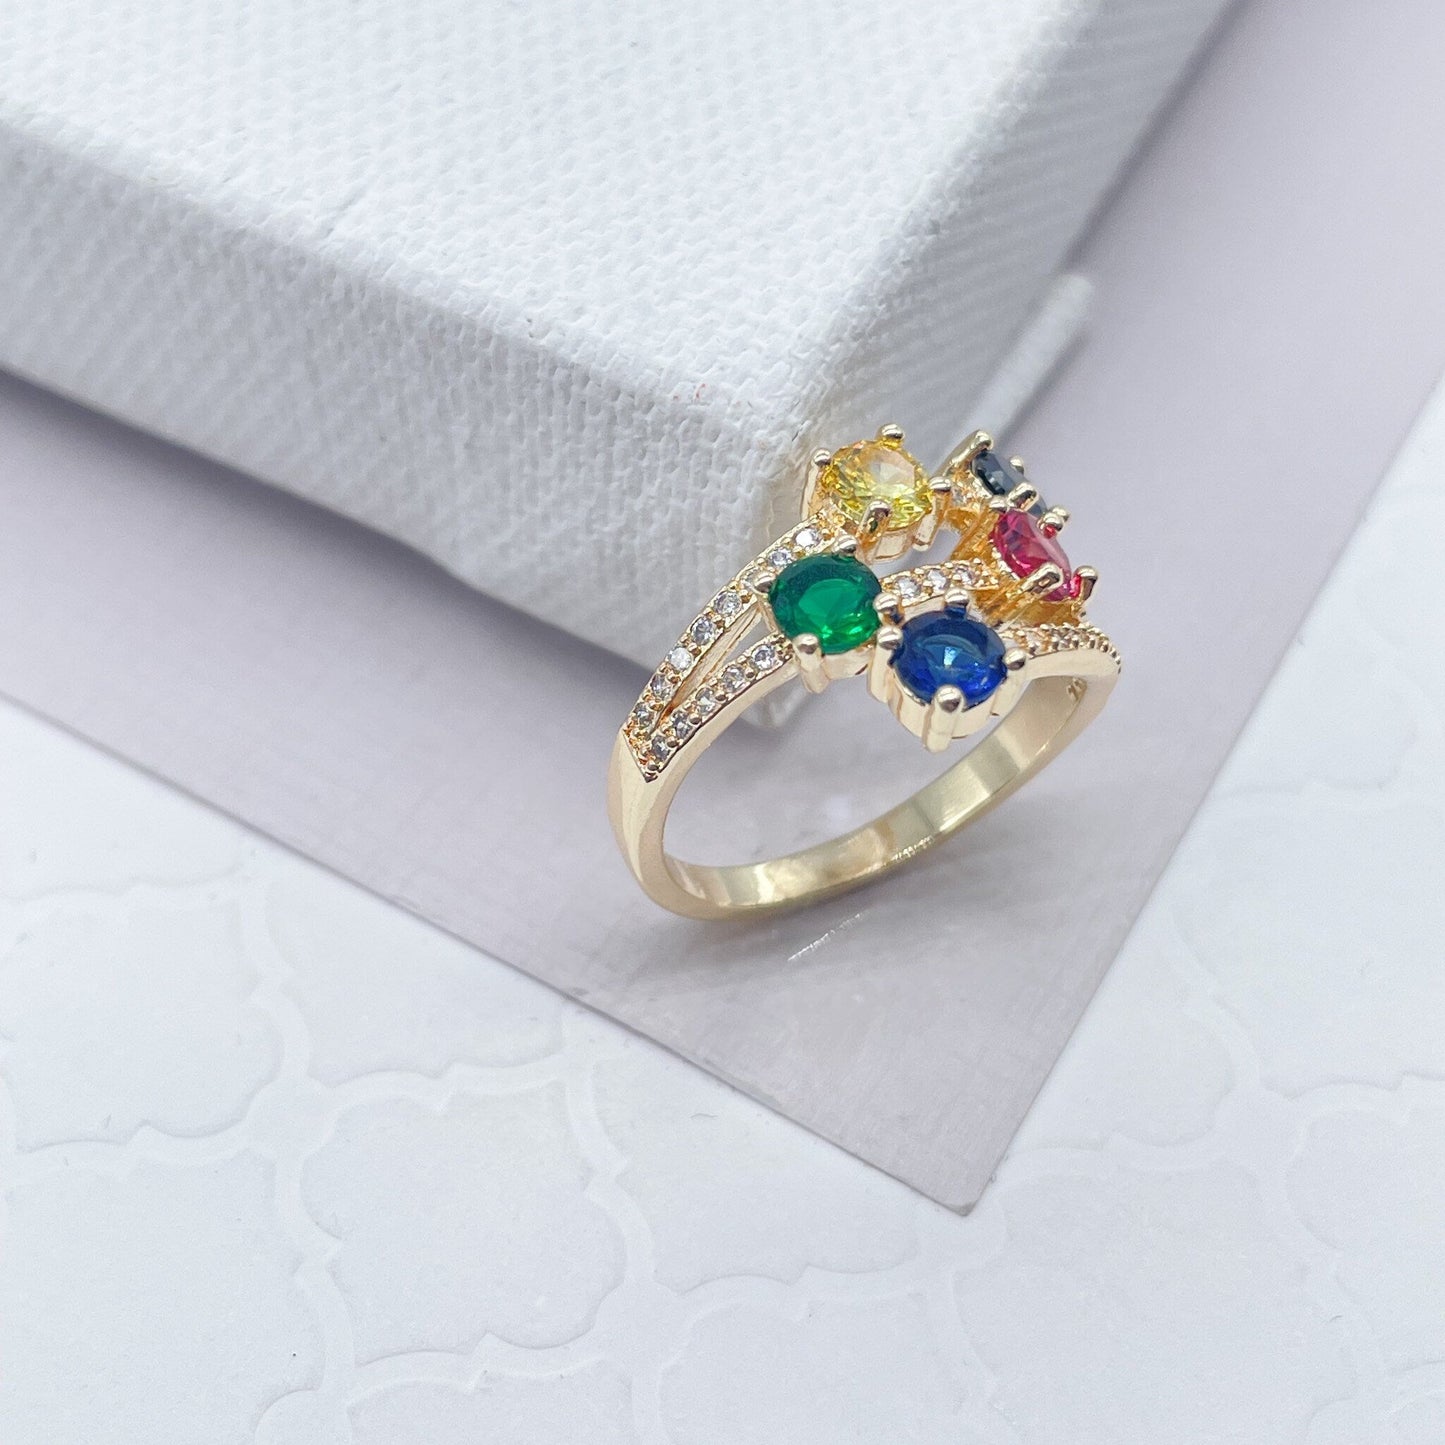 18k Gold Layered with Five Multi Color Cubic Zirconia Stones Ring Details In